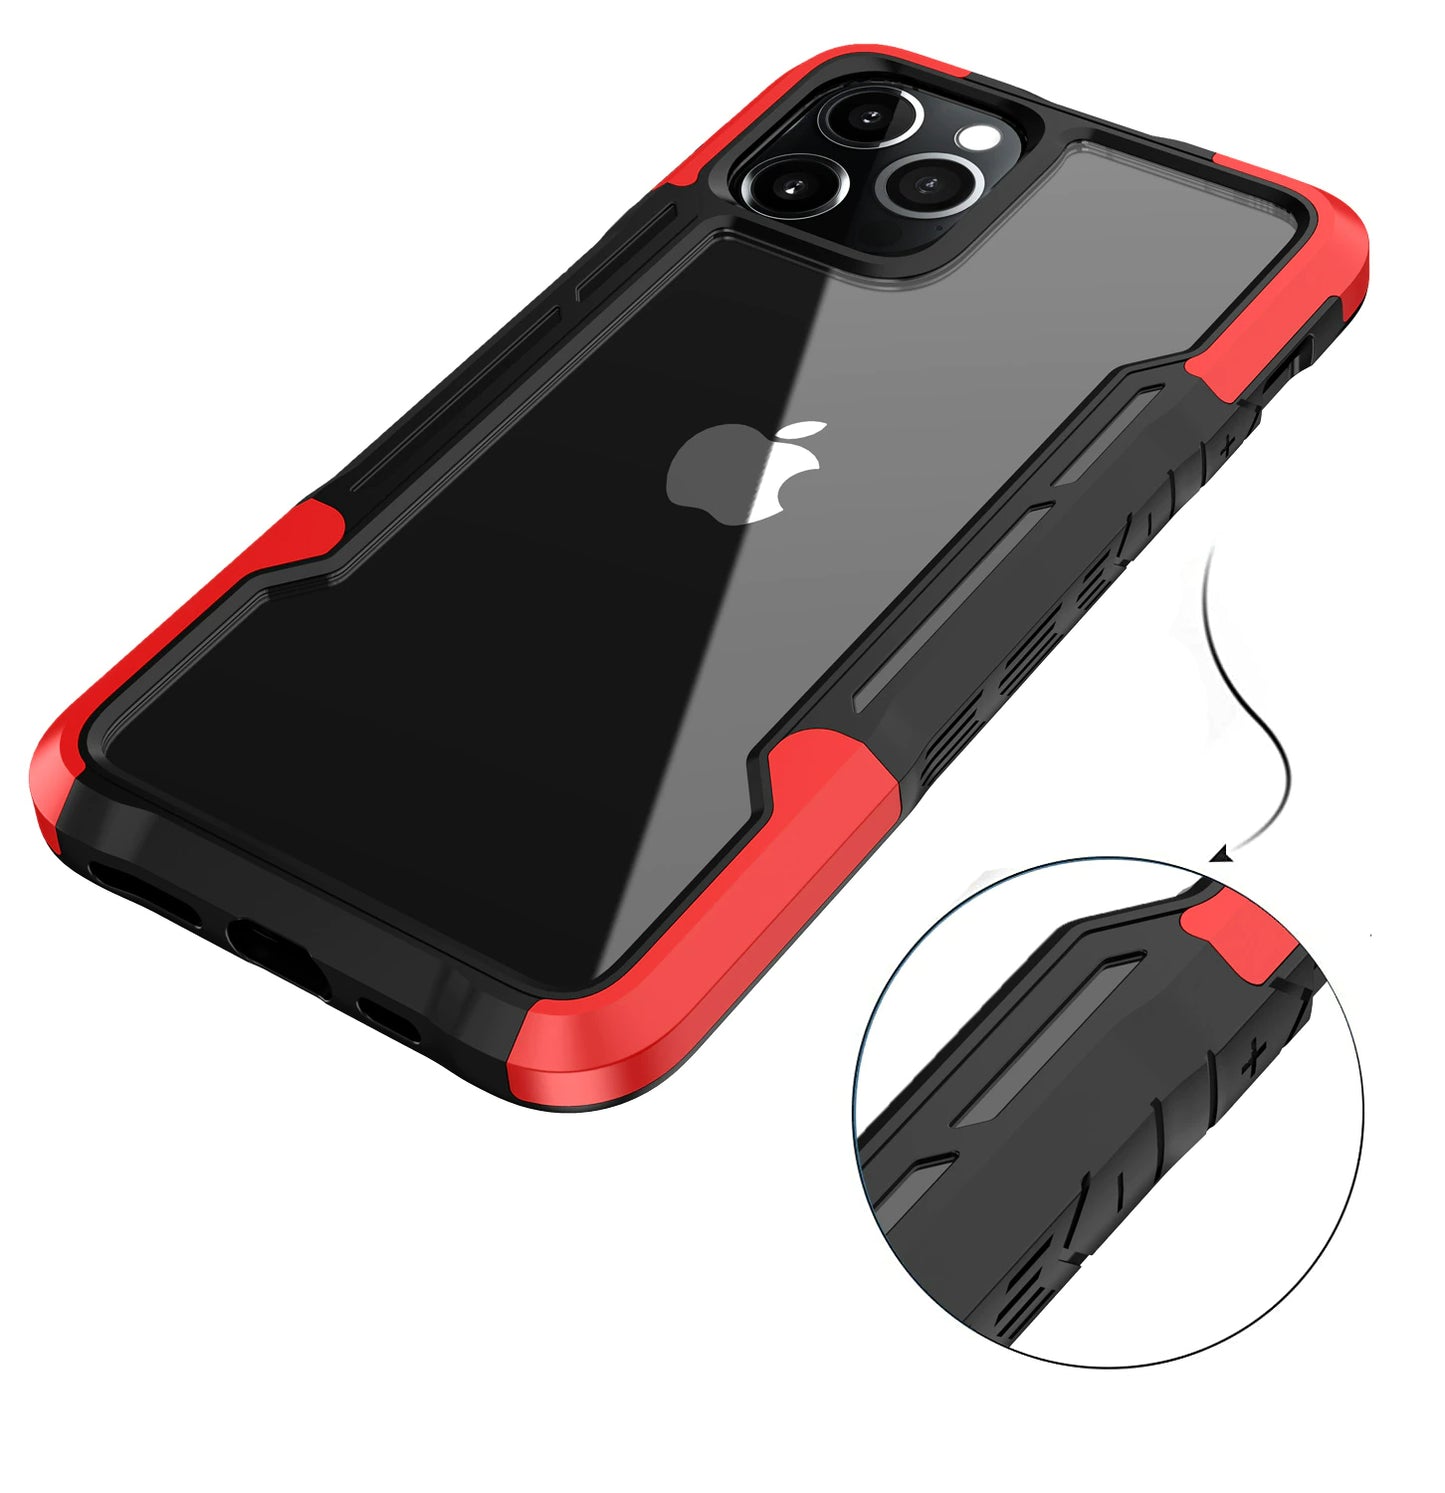 New Shockproof Transparent Hard TPU Phone Case for iPhone - RED